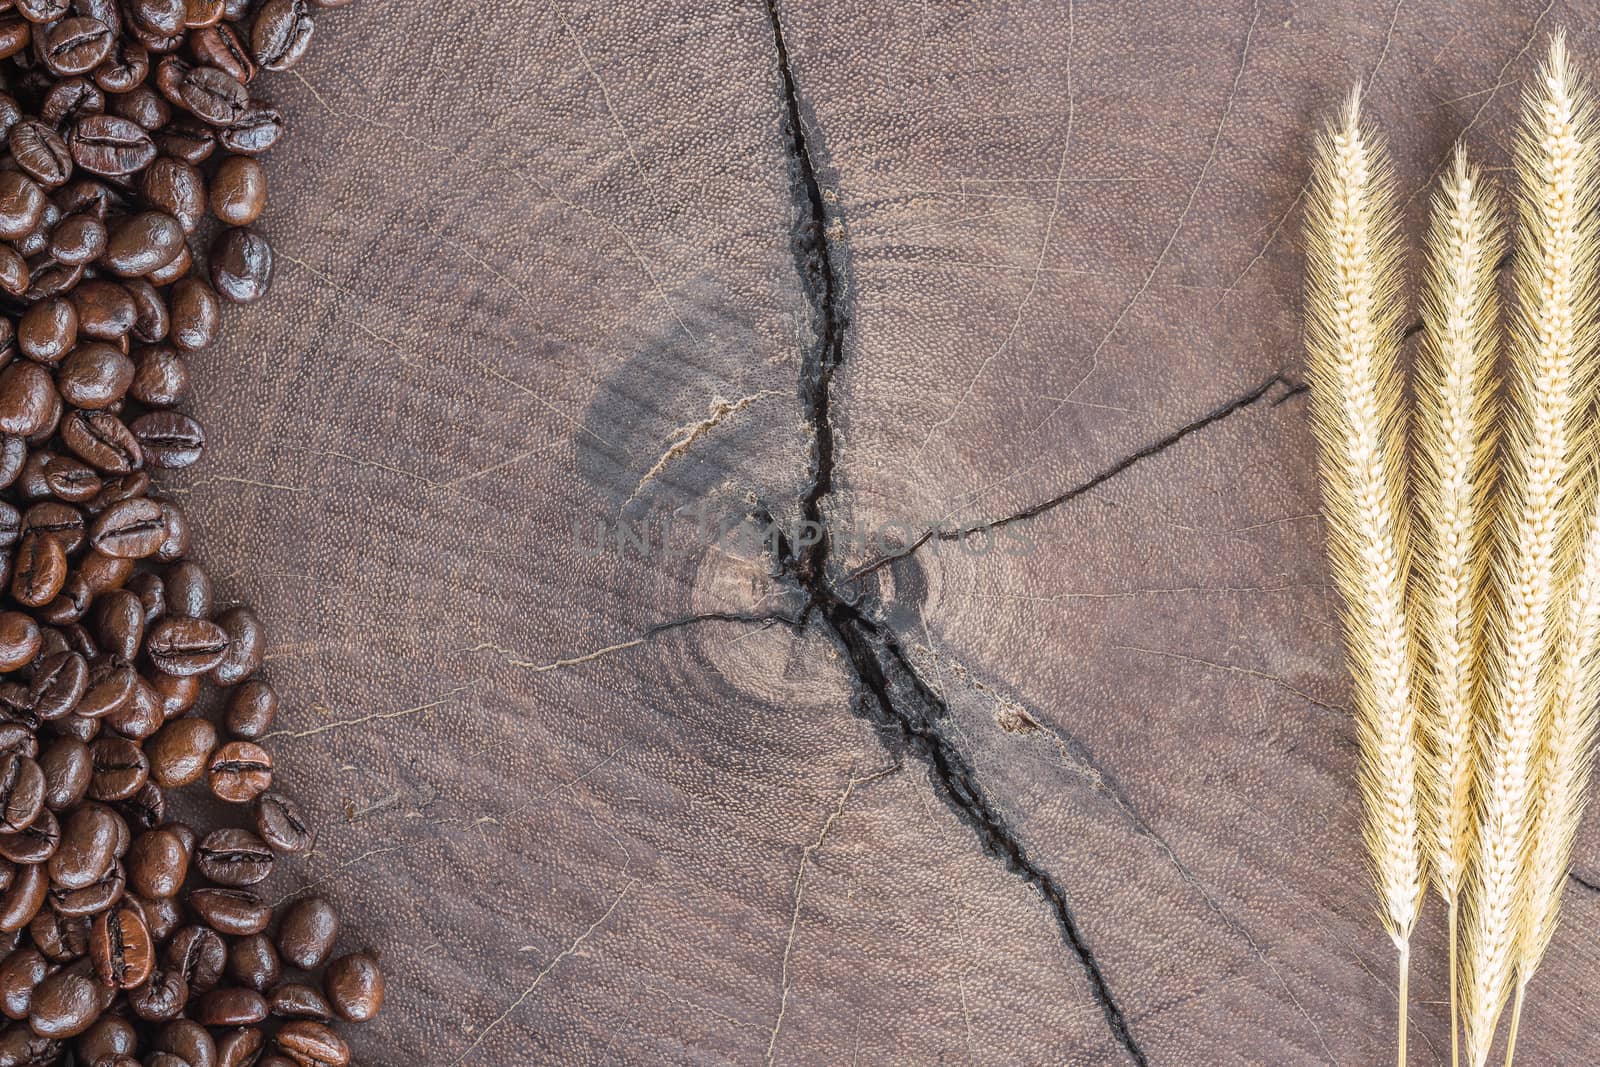 close up coffee beans on wood stump background by blackzheep